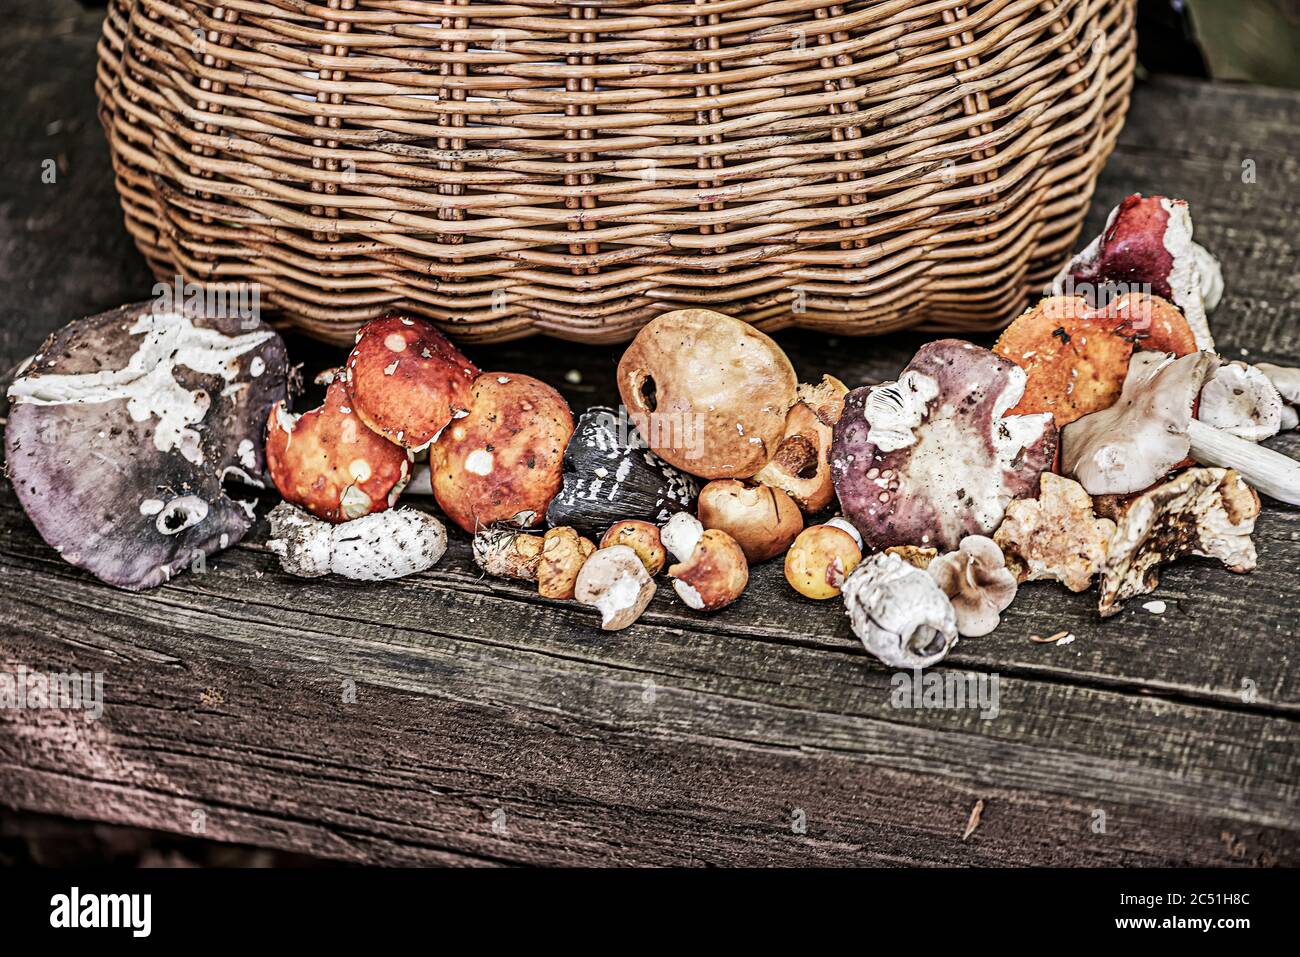 Basket of mushrooms, little known, but excellent. Stock Photo